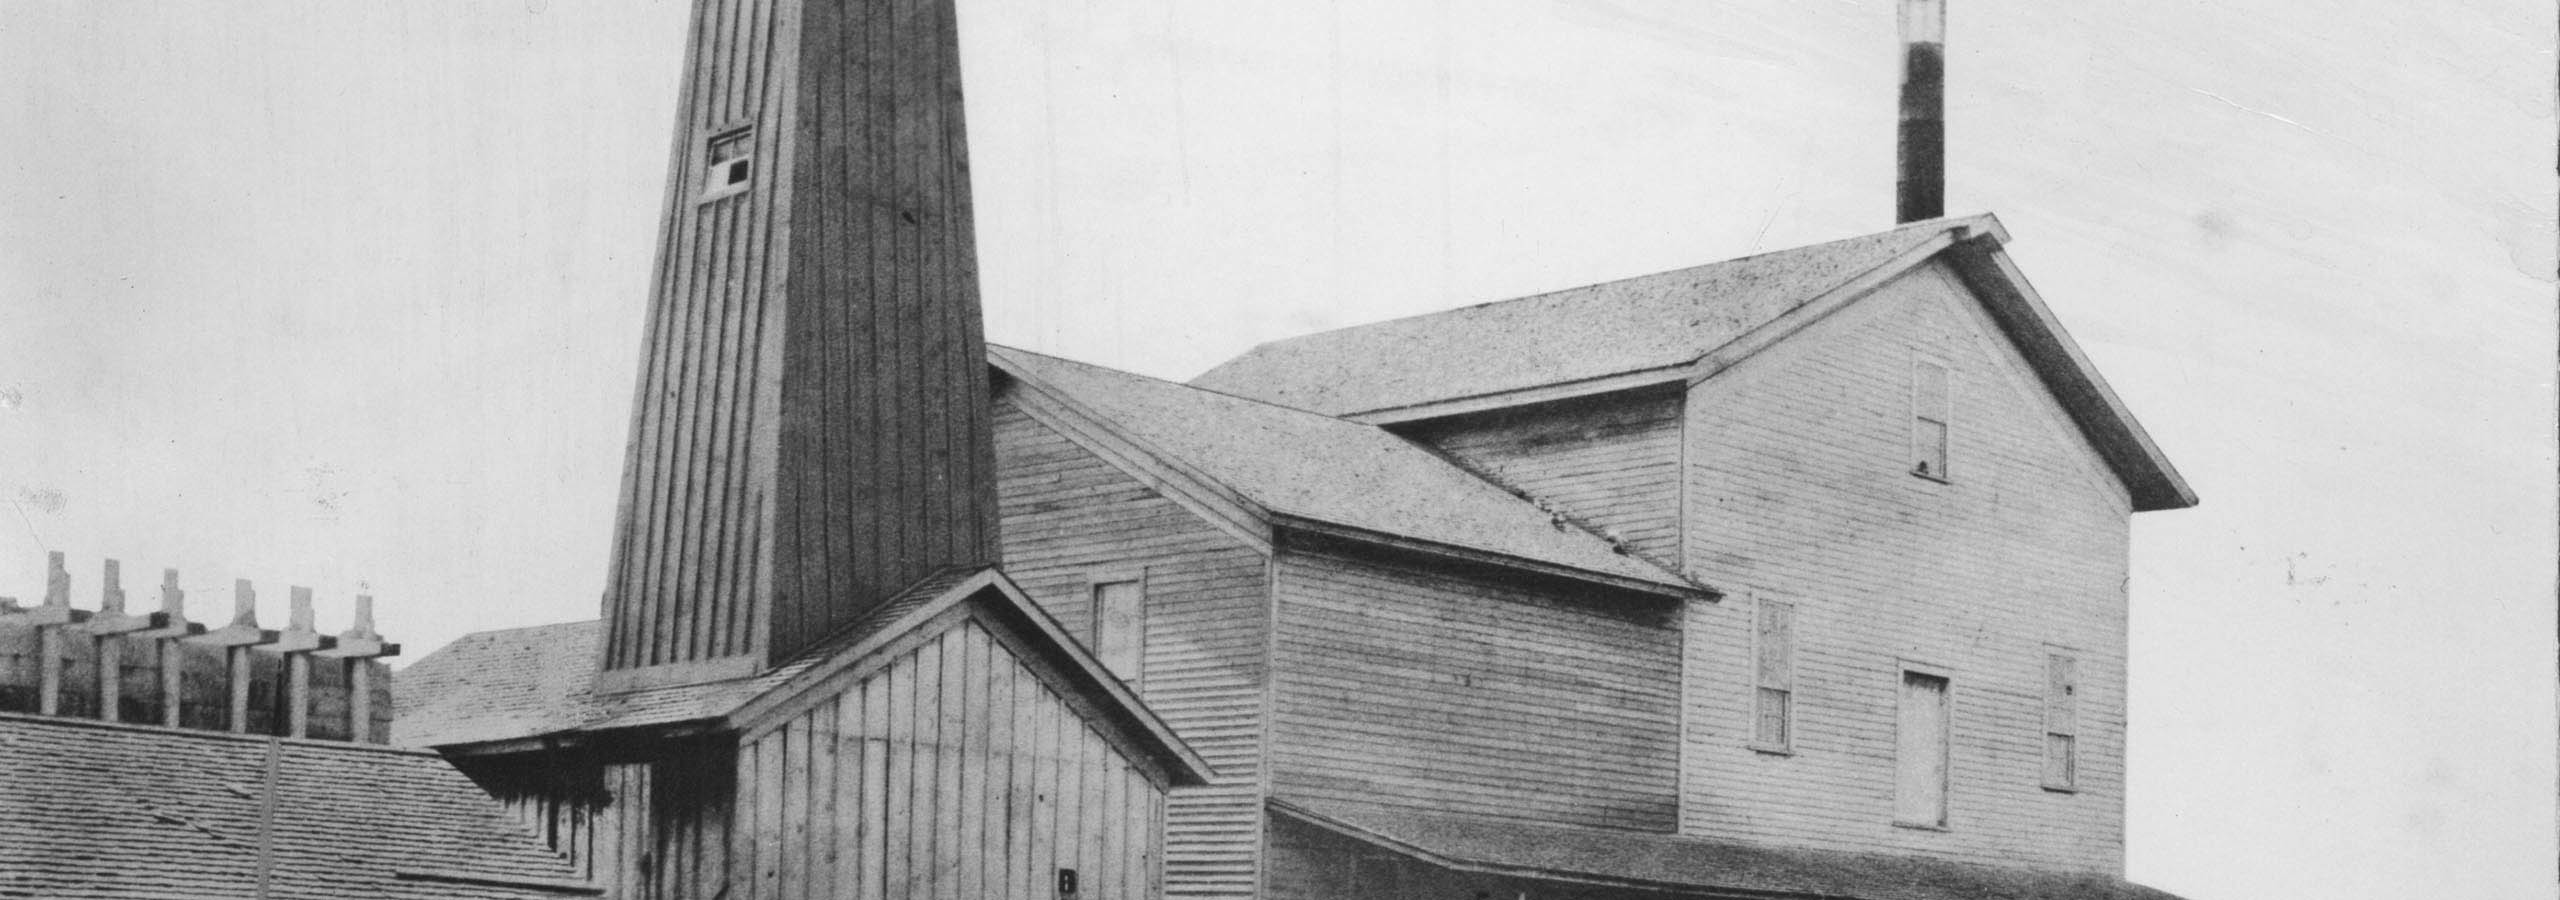 old photo of a flour mill